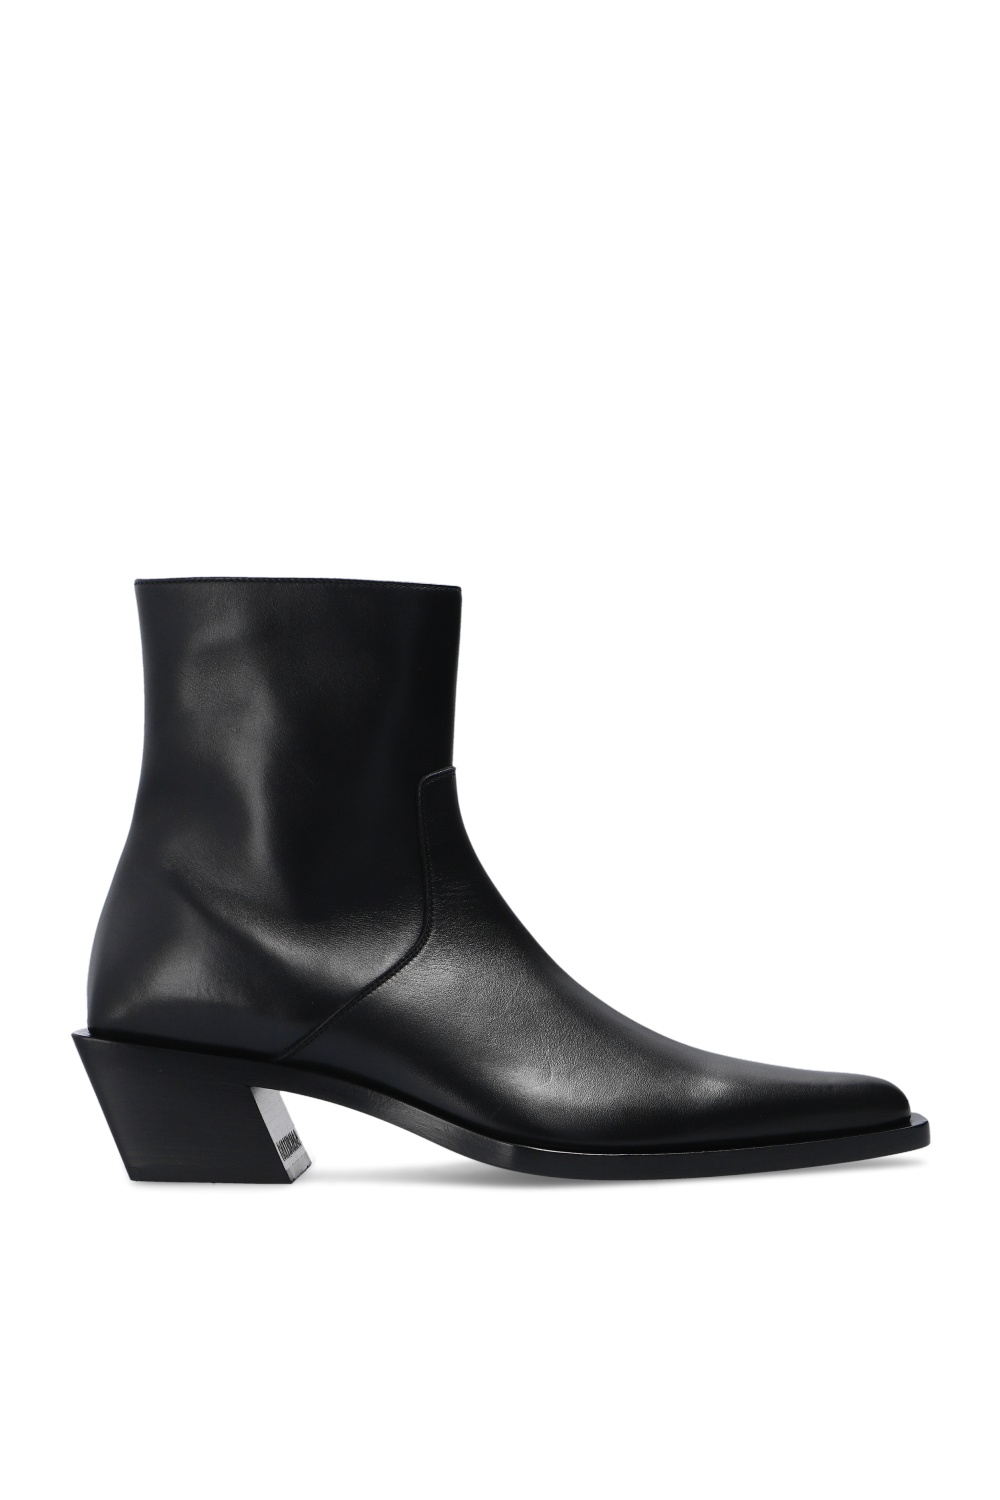 Black Tiaga 45 Ankle Boots in leather